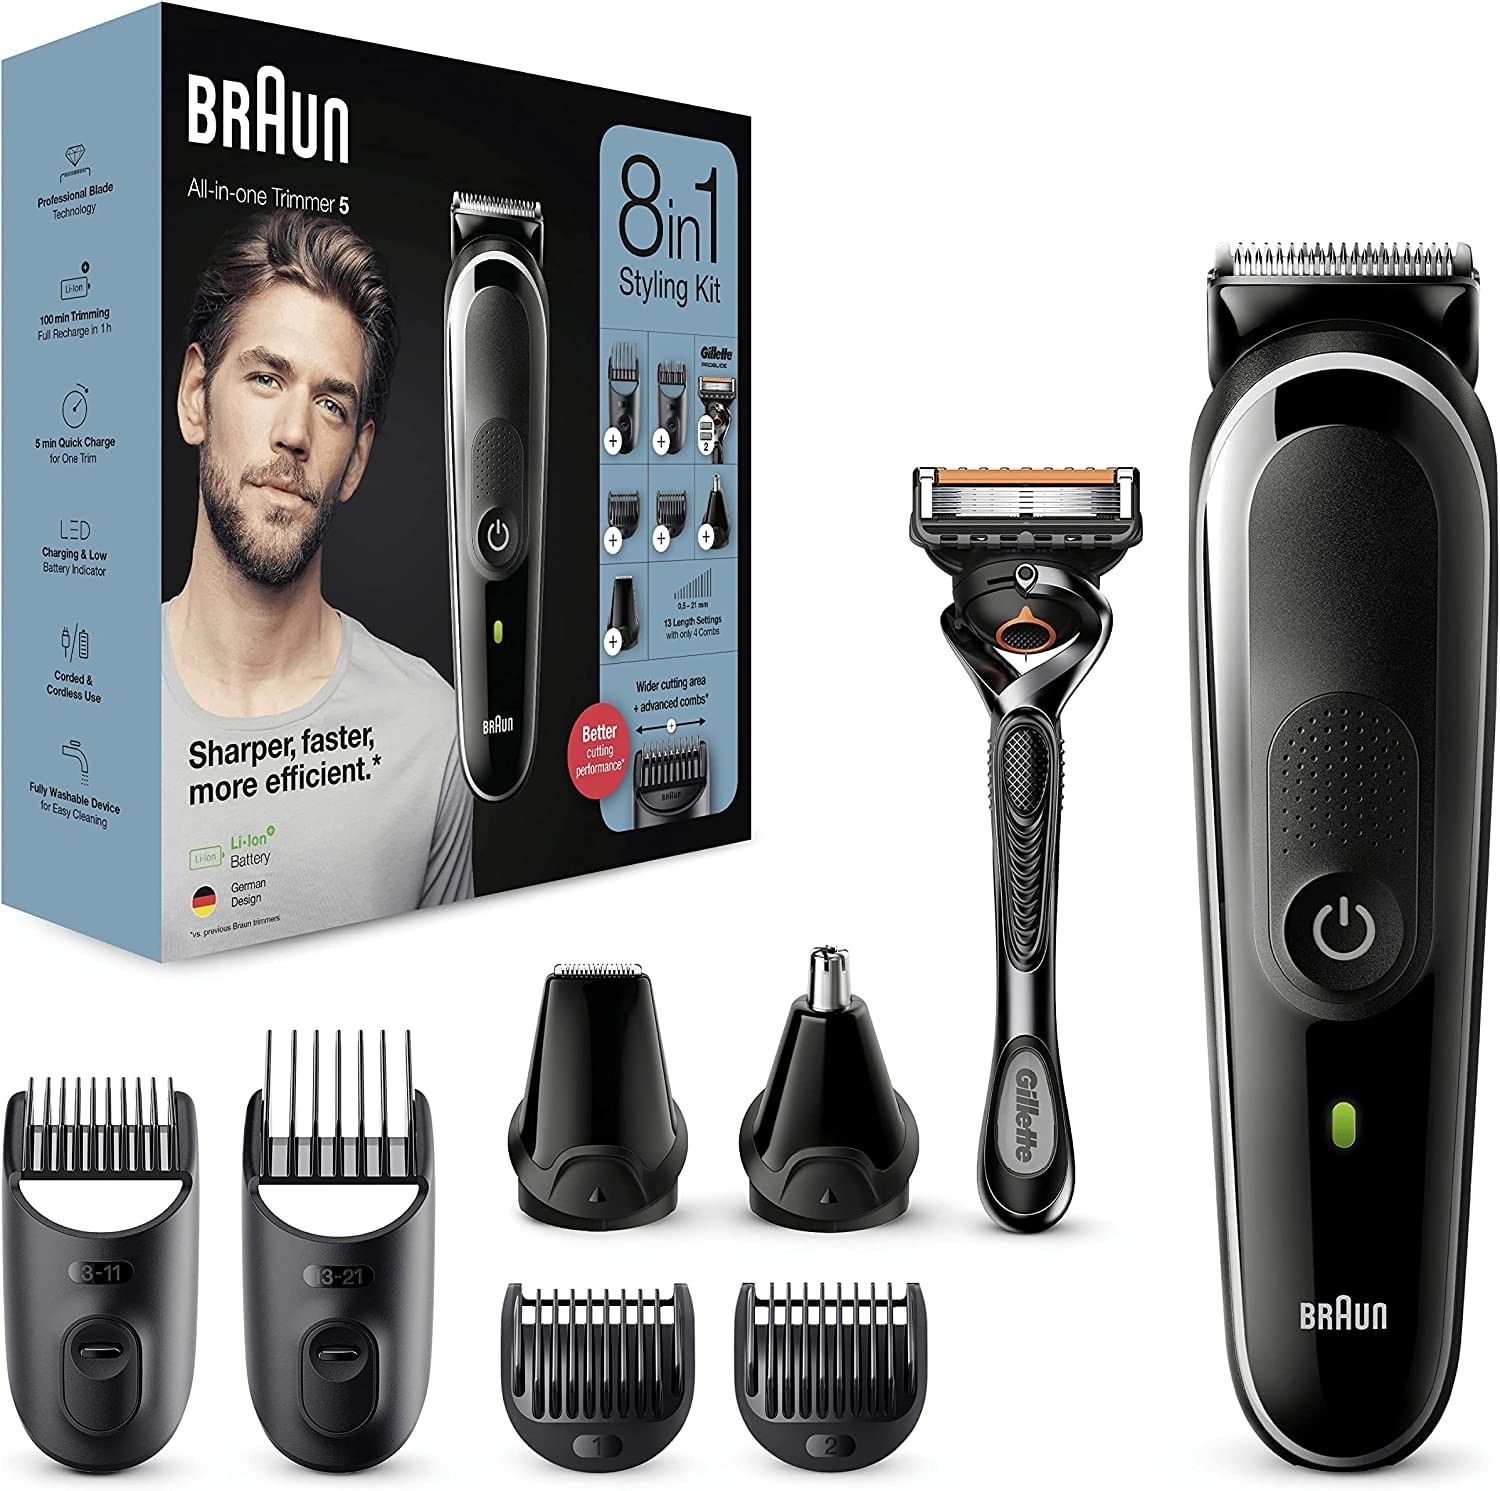 BRAUN TONDEUSE ALL IN ONE 8 IN 1 MGK5260 - YOUNESCOIF